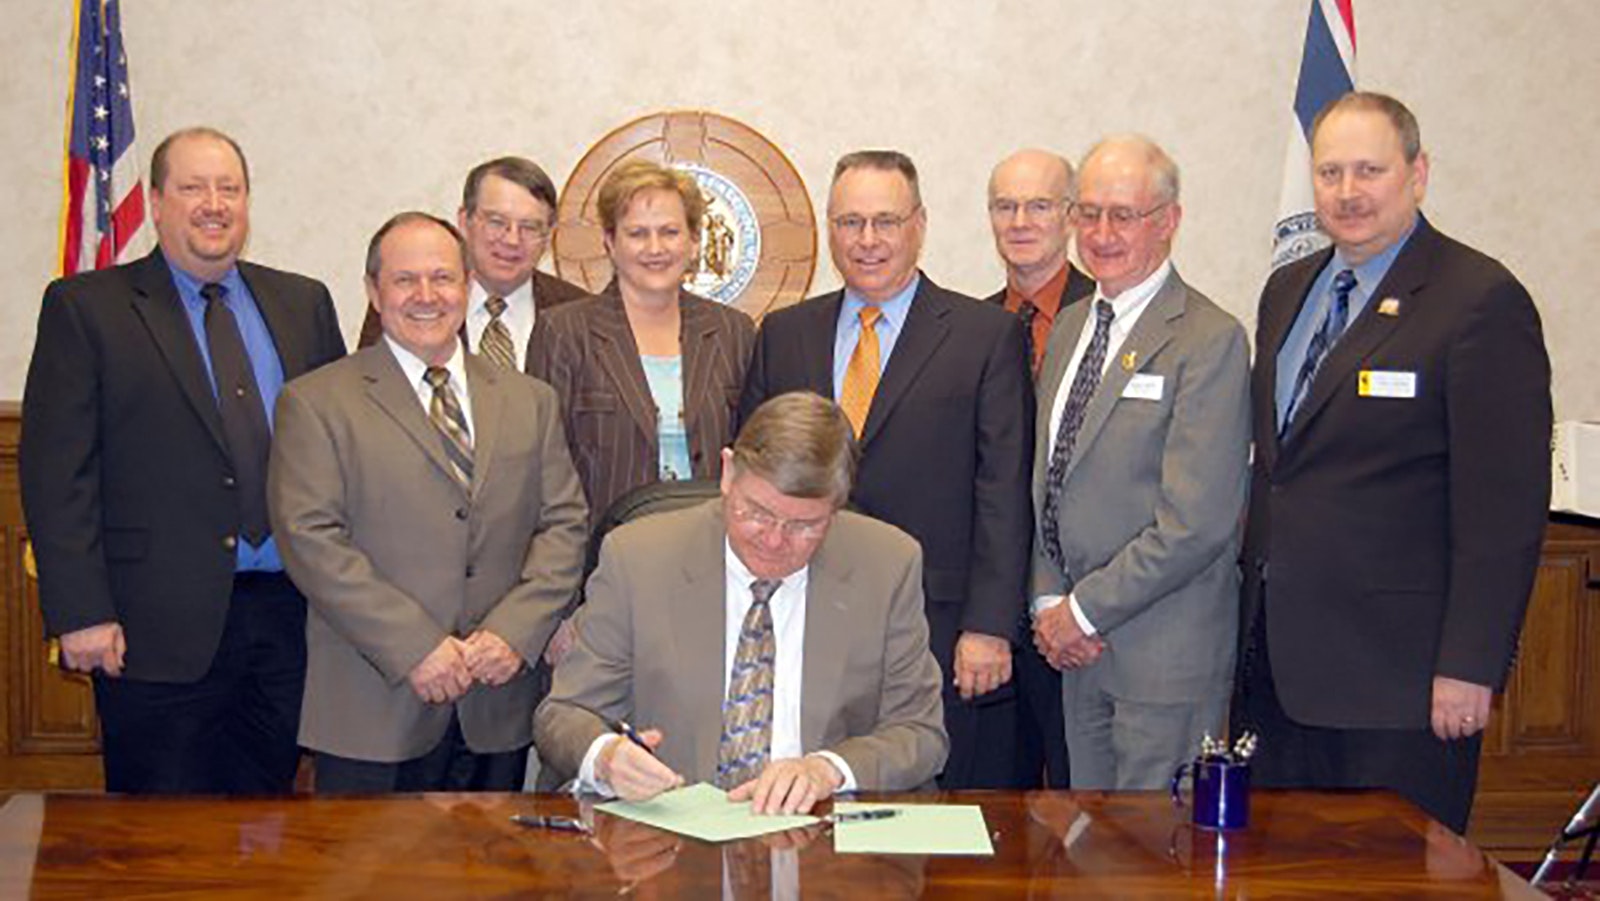 John Hines (second from right) watches as former Wyoming Gov. Dave Freudenthal signs into law a Madison Pipeline bill in 2009.